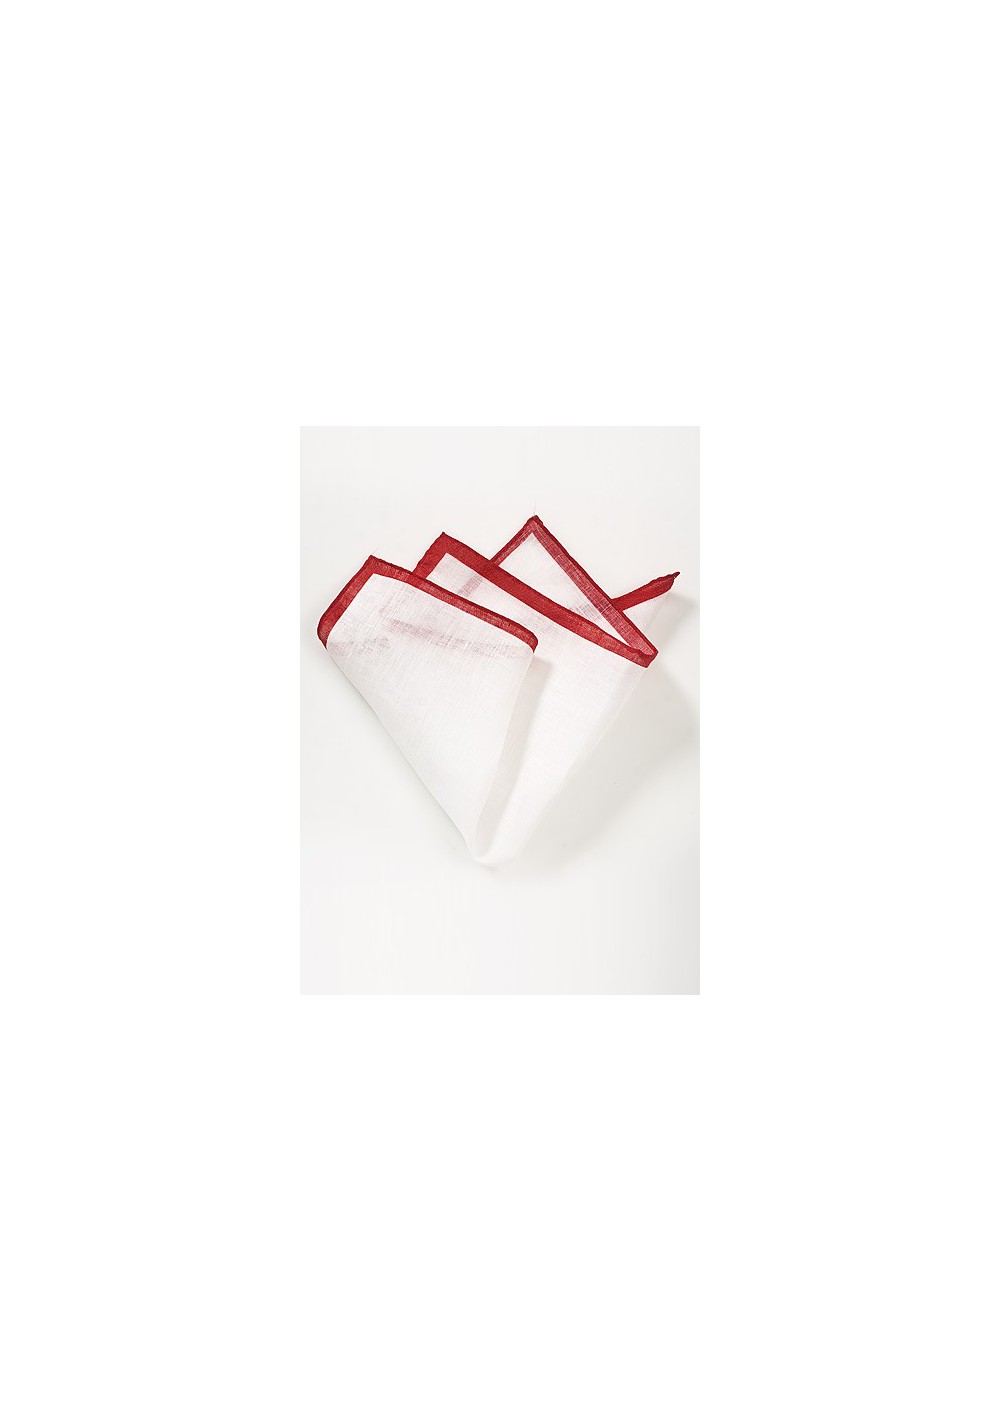 White Linen Pocket Square with Red Border